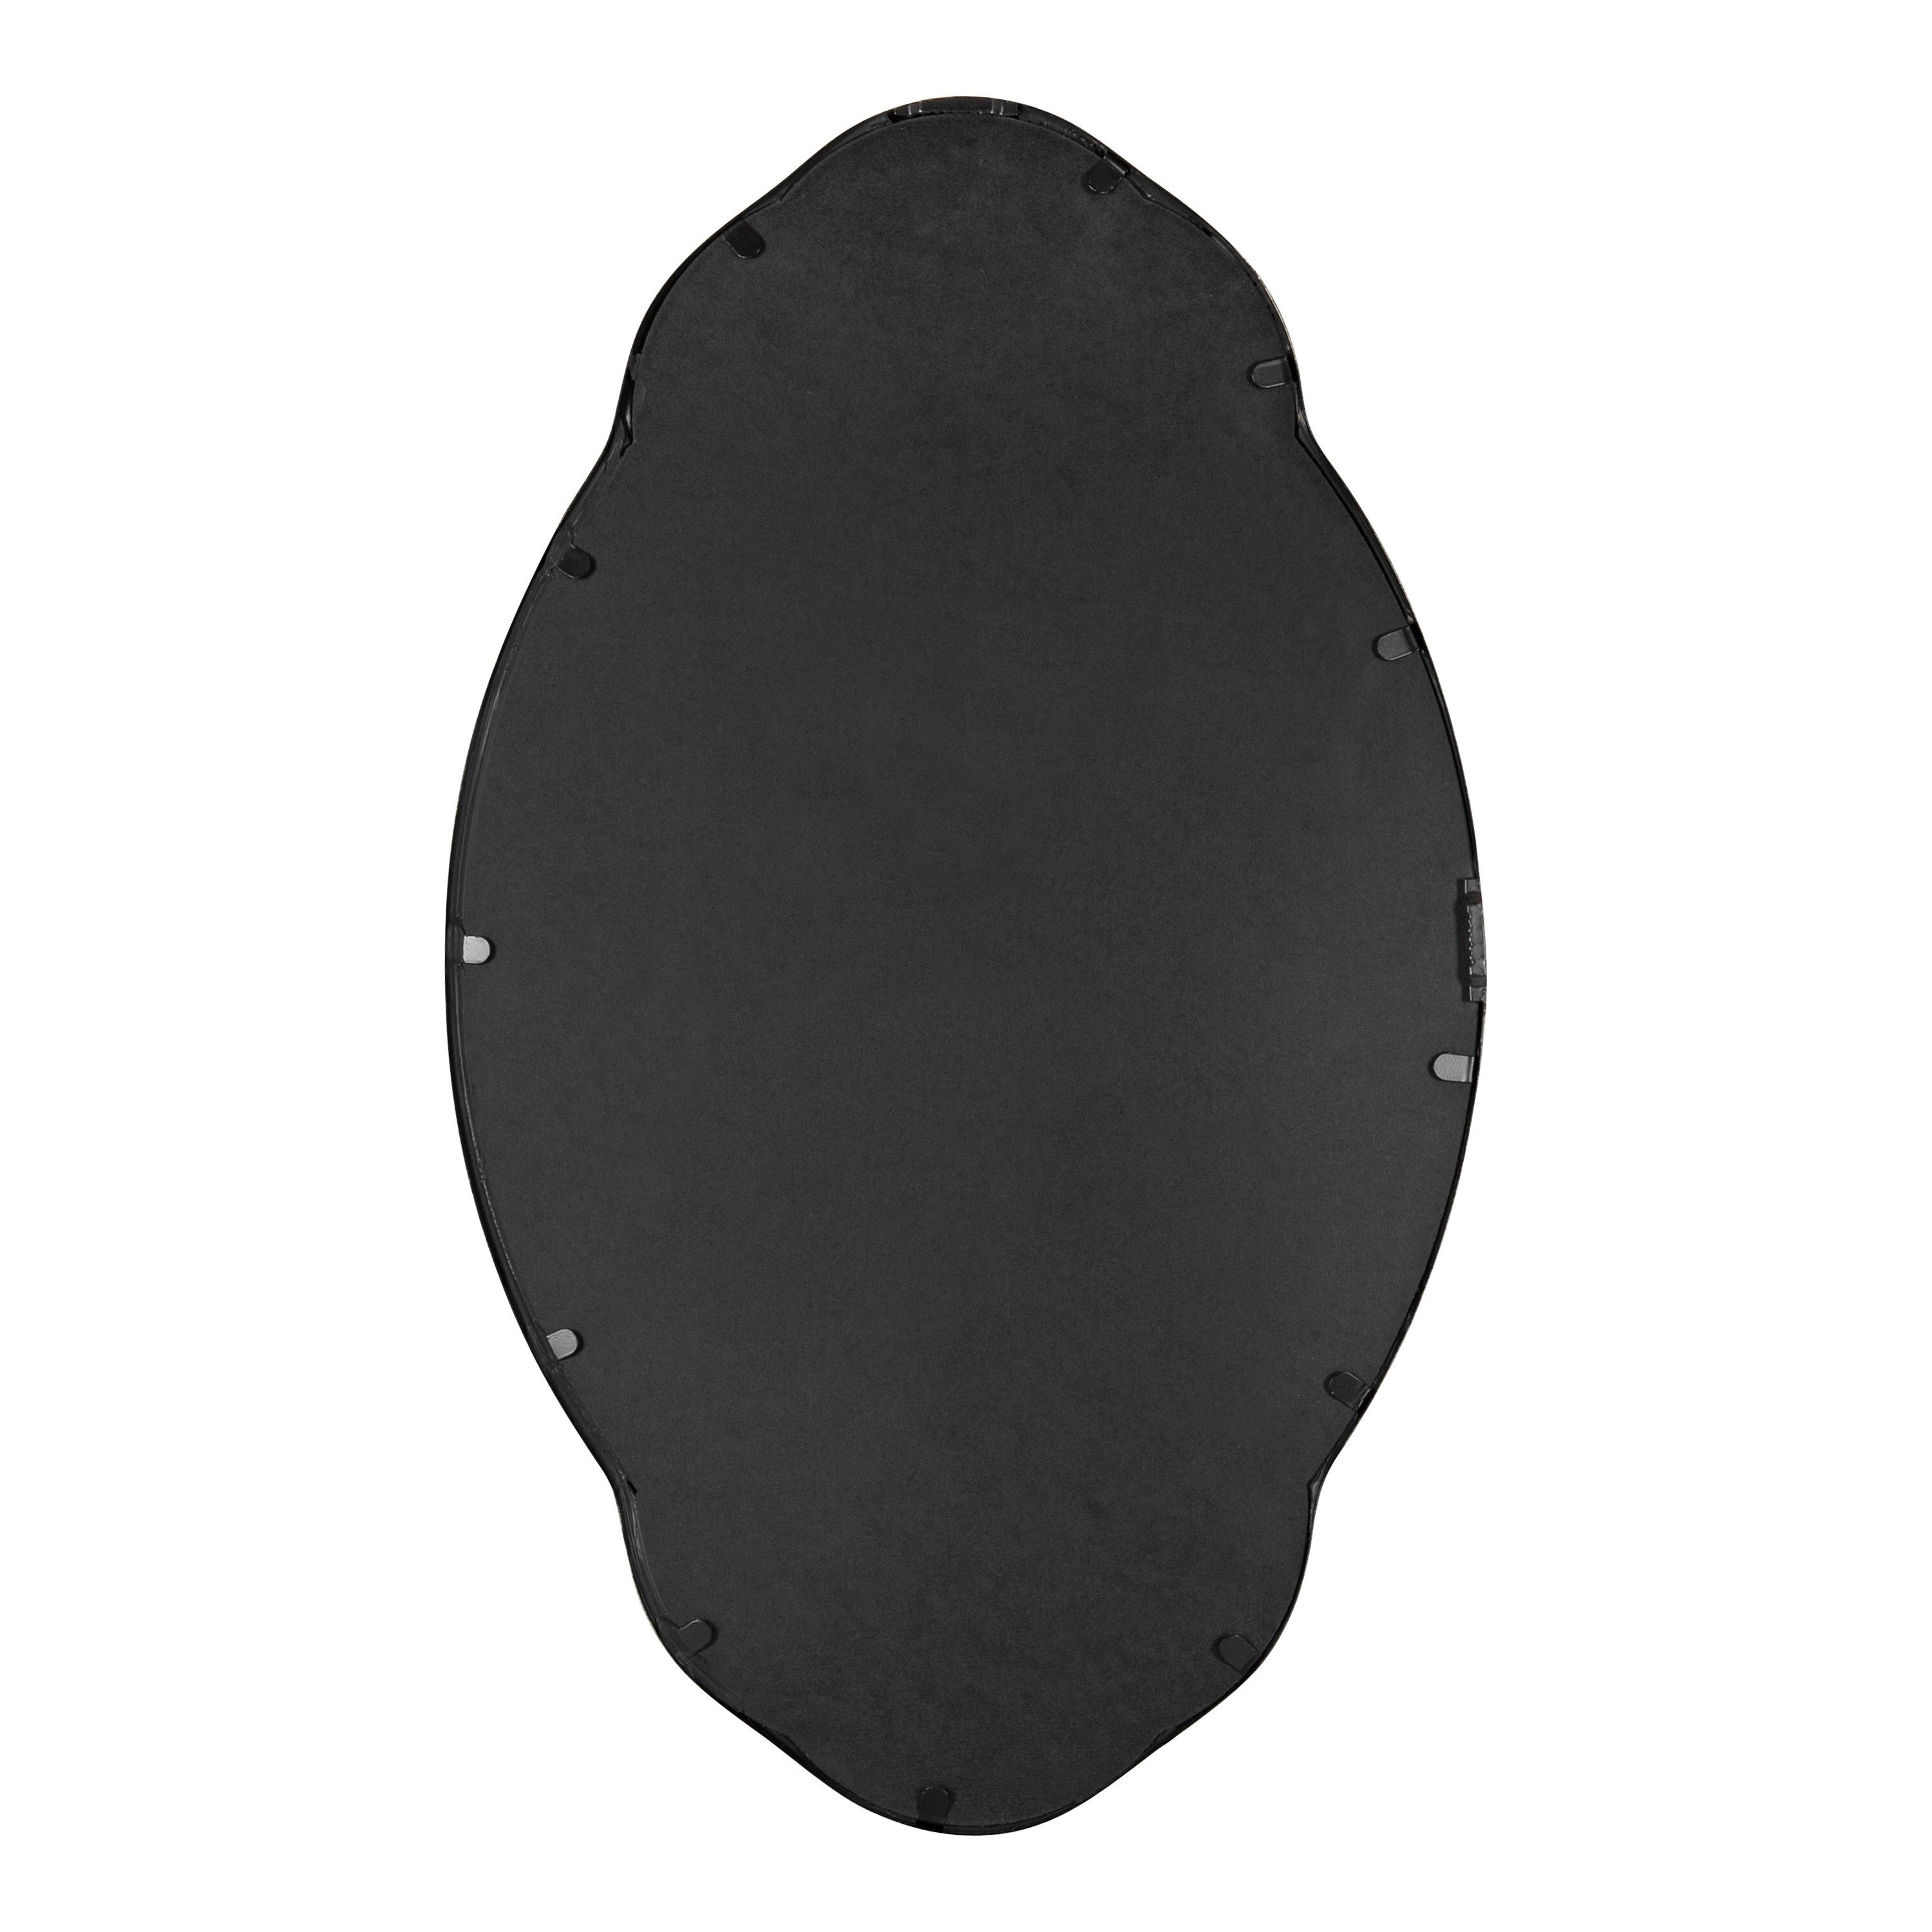 Kate and Laurel Magritte Scalloped Oval Wall Mirror On Sale Bed Bath   Beyond 31292373